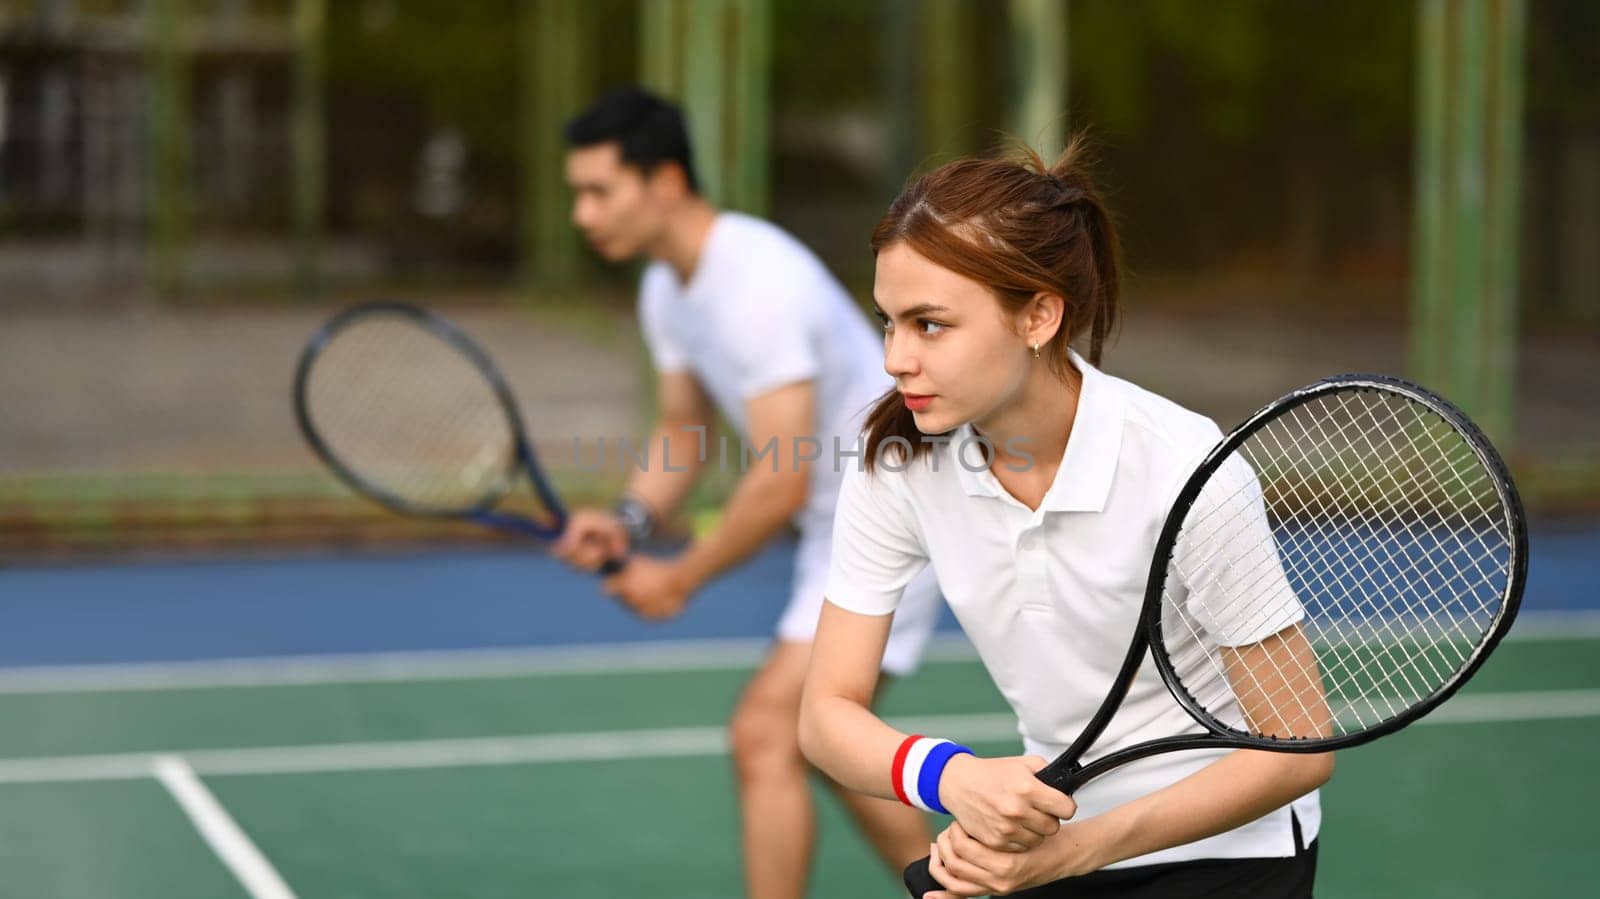 Focused female athlete with a racket waiting to receive ball during match at outdoor court by prathanchorruangsak